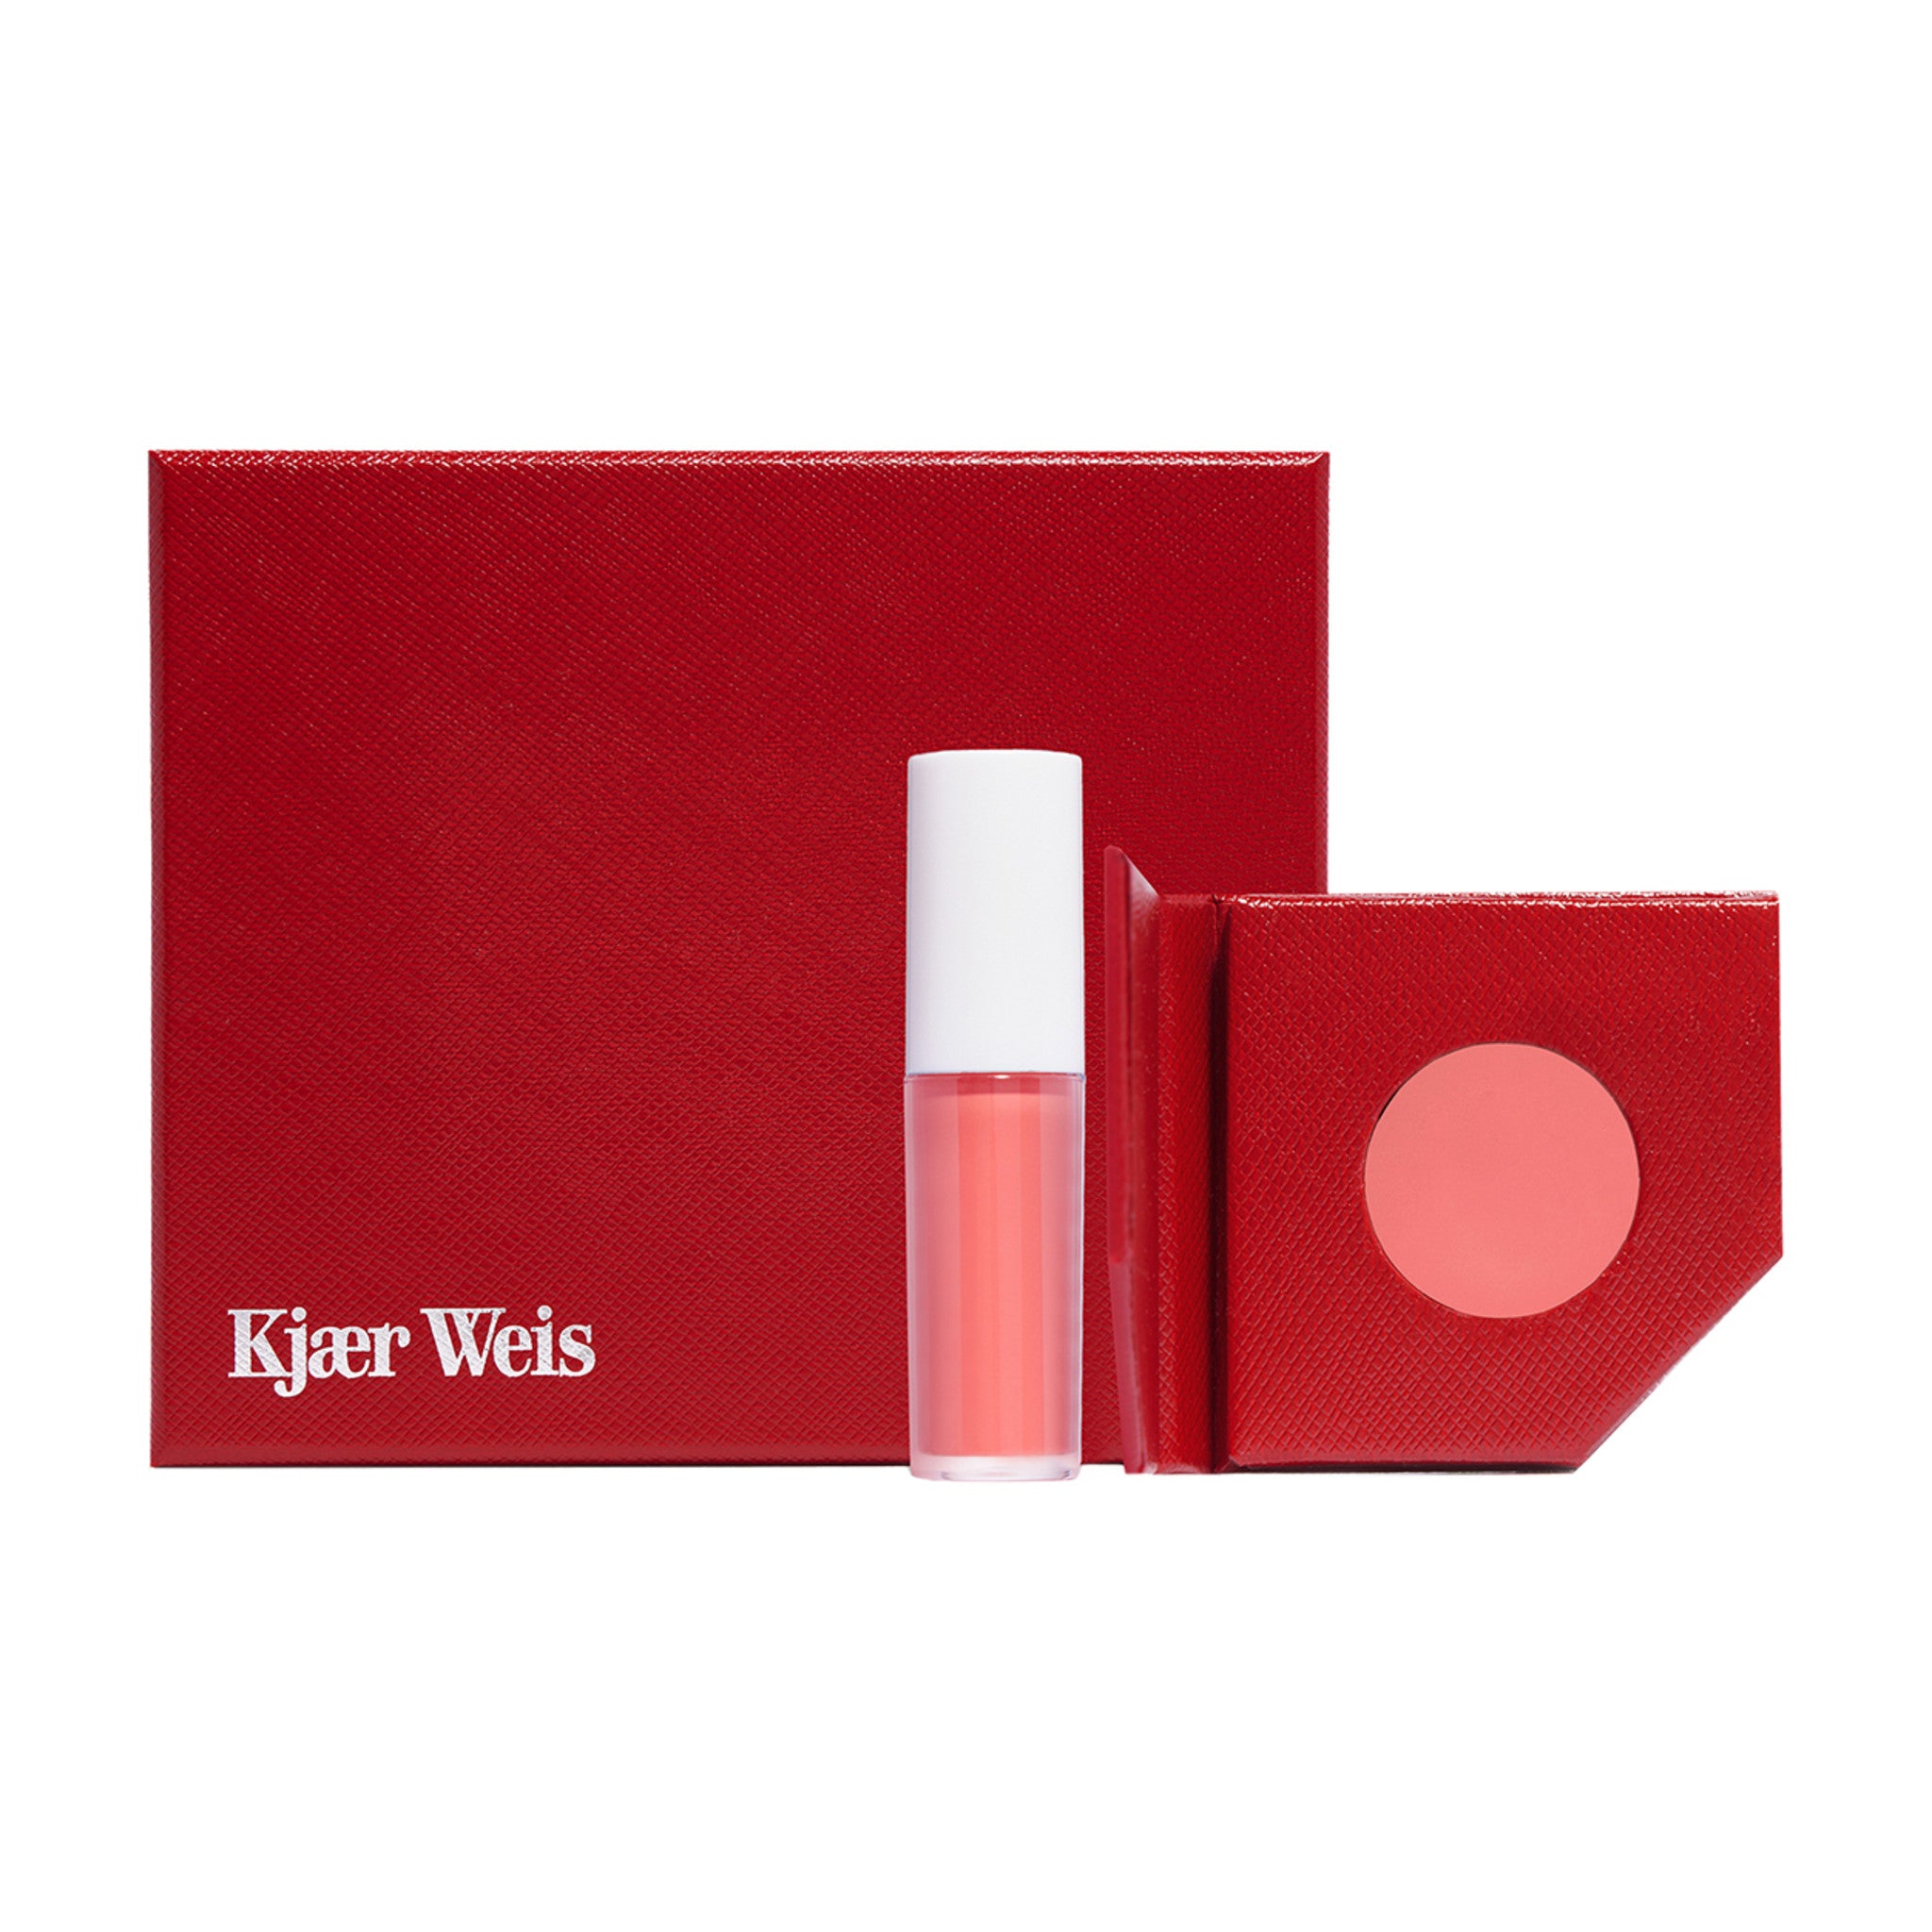 Kjaer Weis A Touch of KW (Limited Edition) main image.